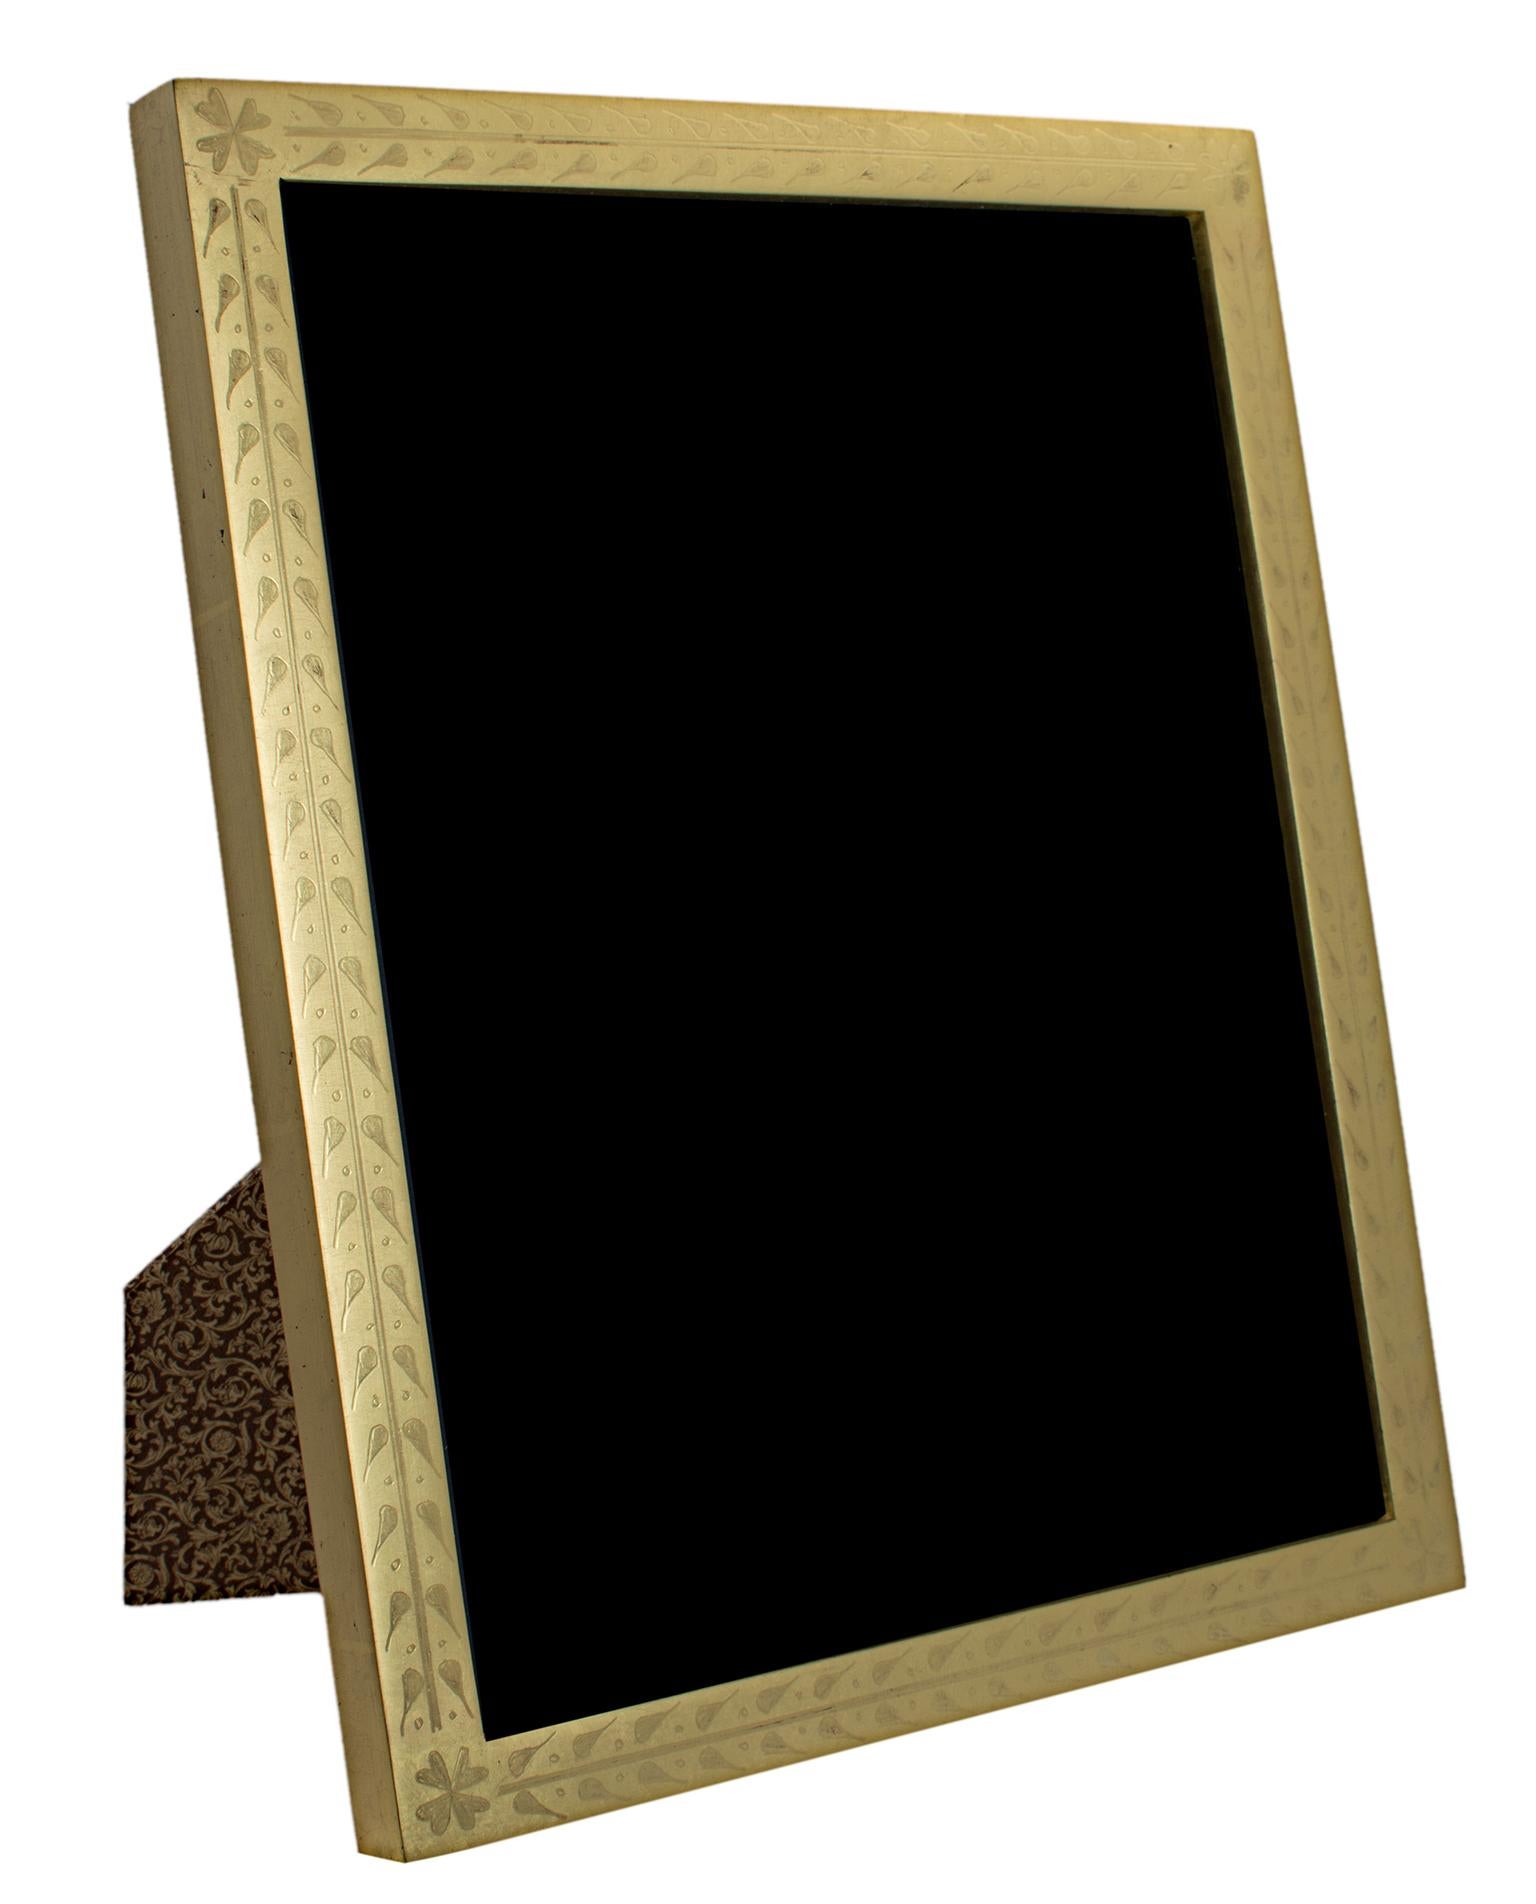 "Handmade 22K Gold Leaf Photo Frame, " Wood 8 x 10 in created in Romania - Art by Unknown